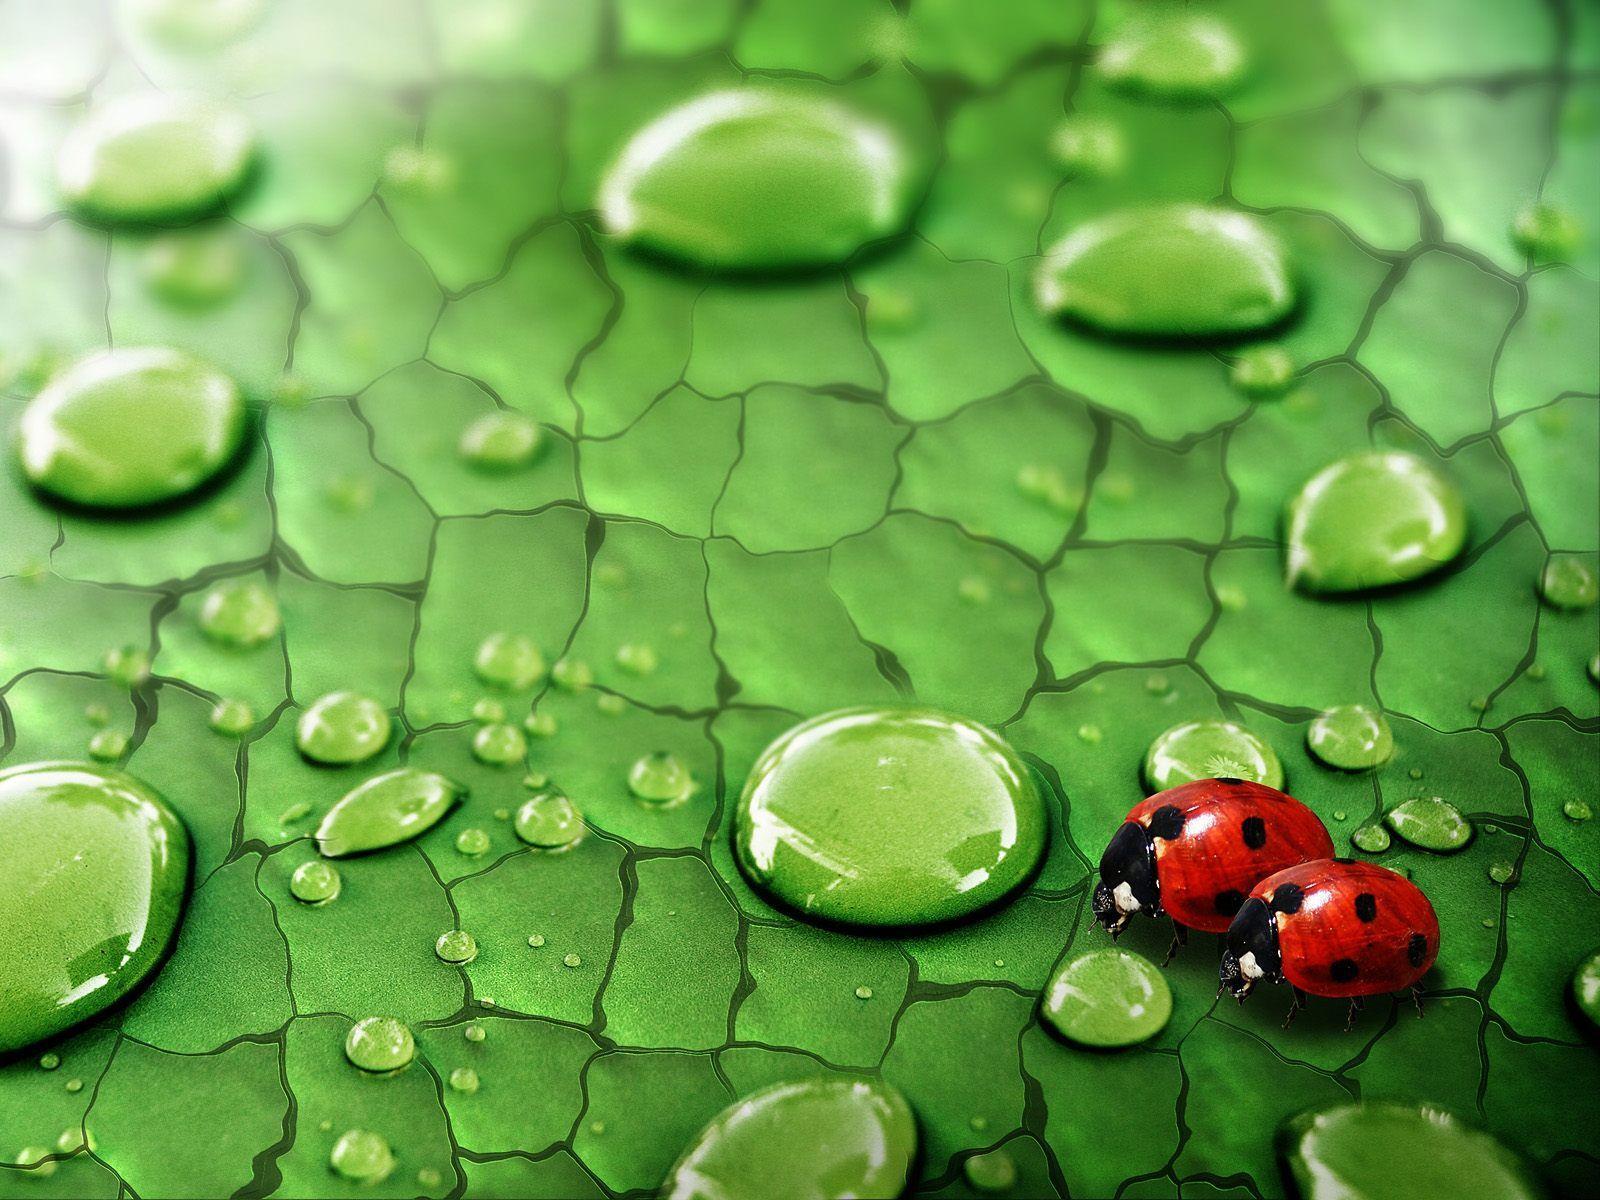 Image Detail for Drops and Ladybugs. Image